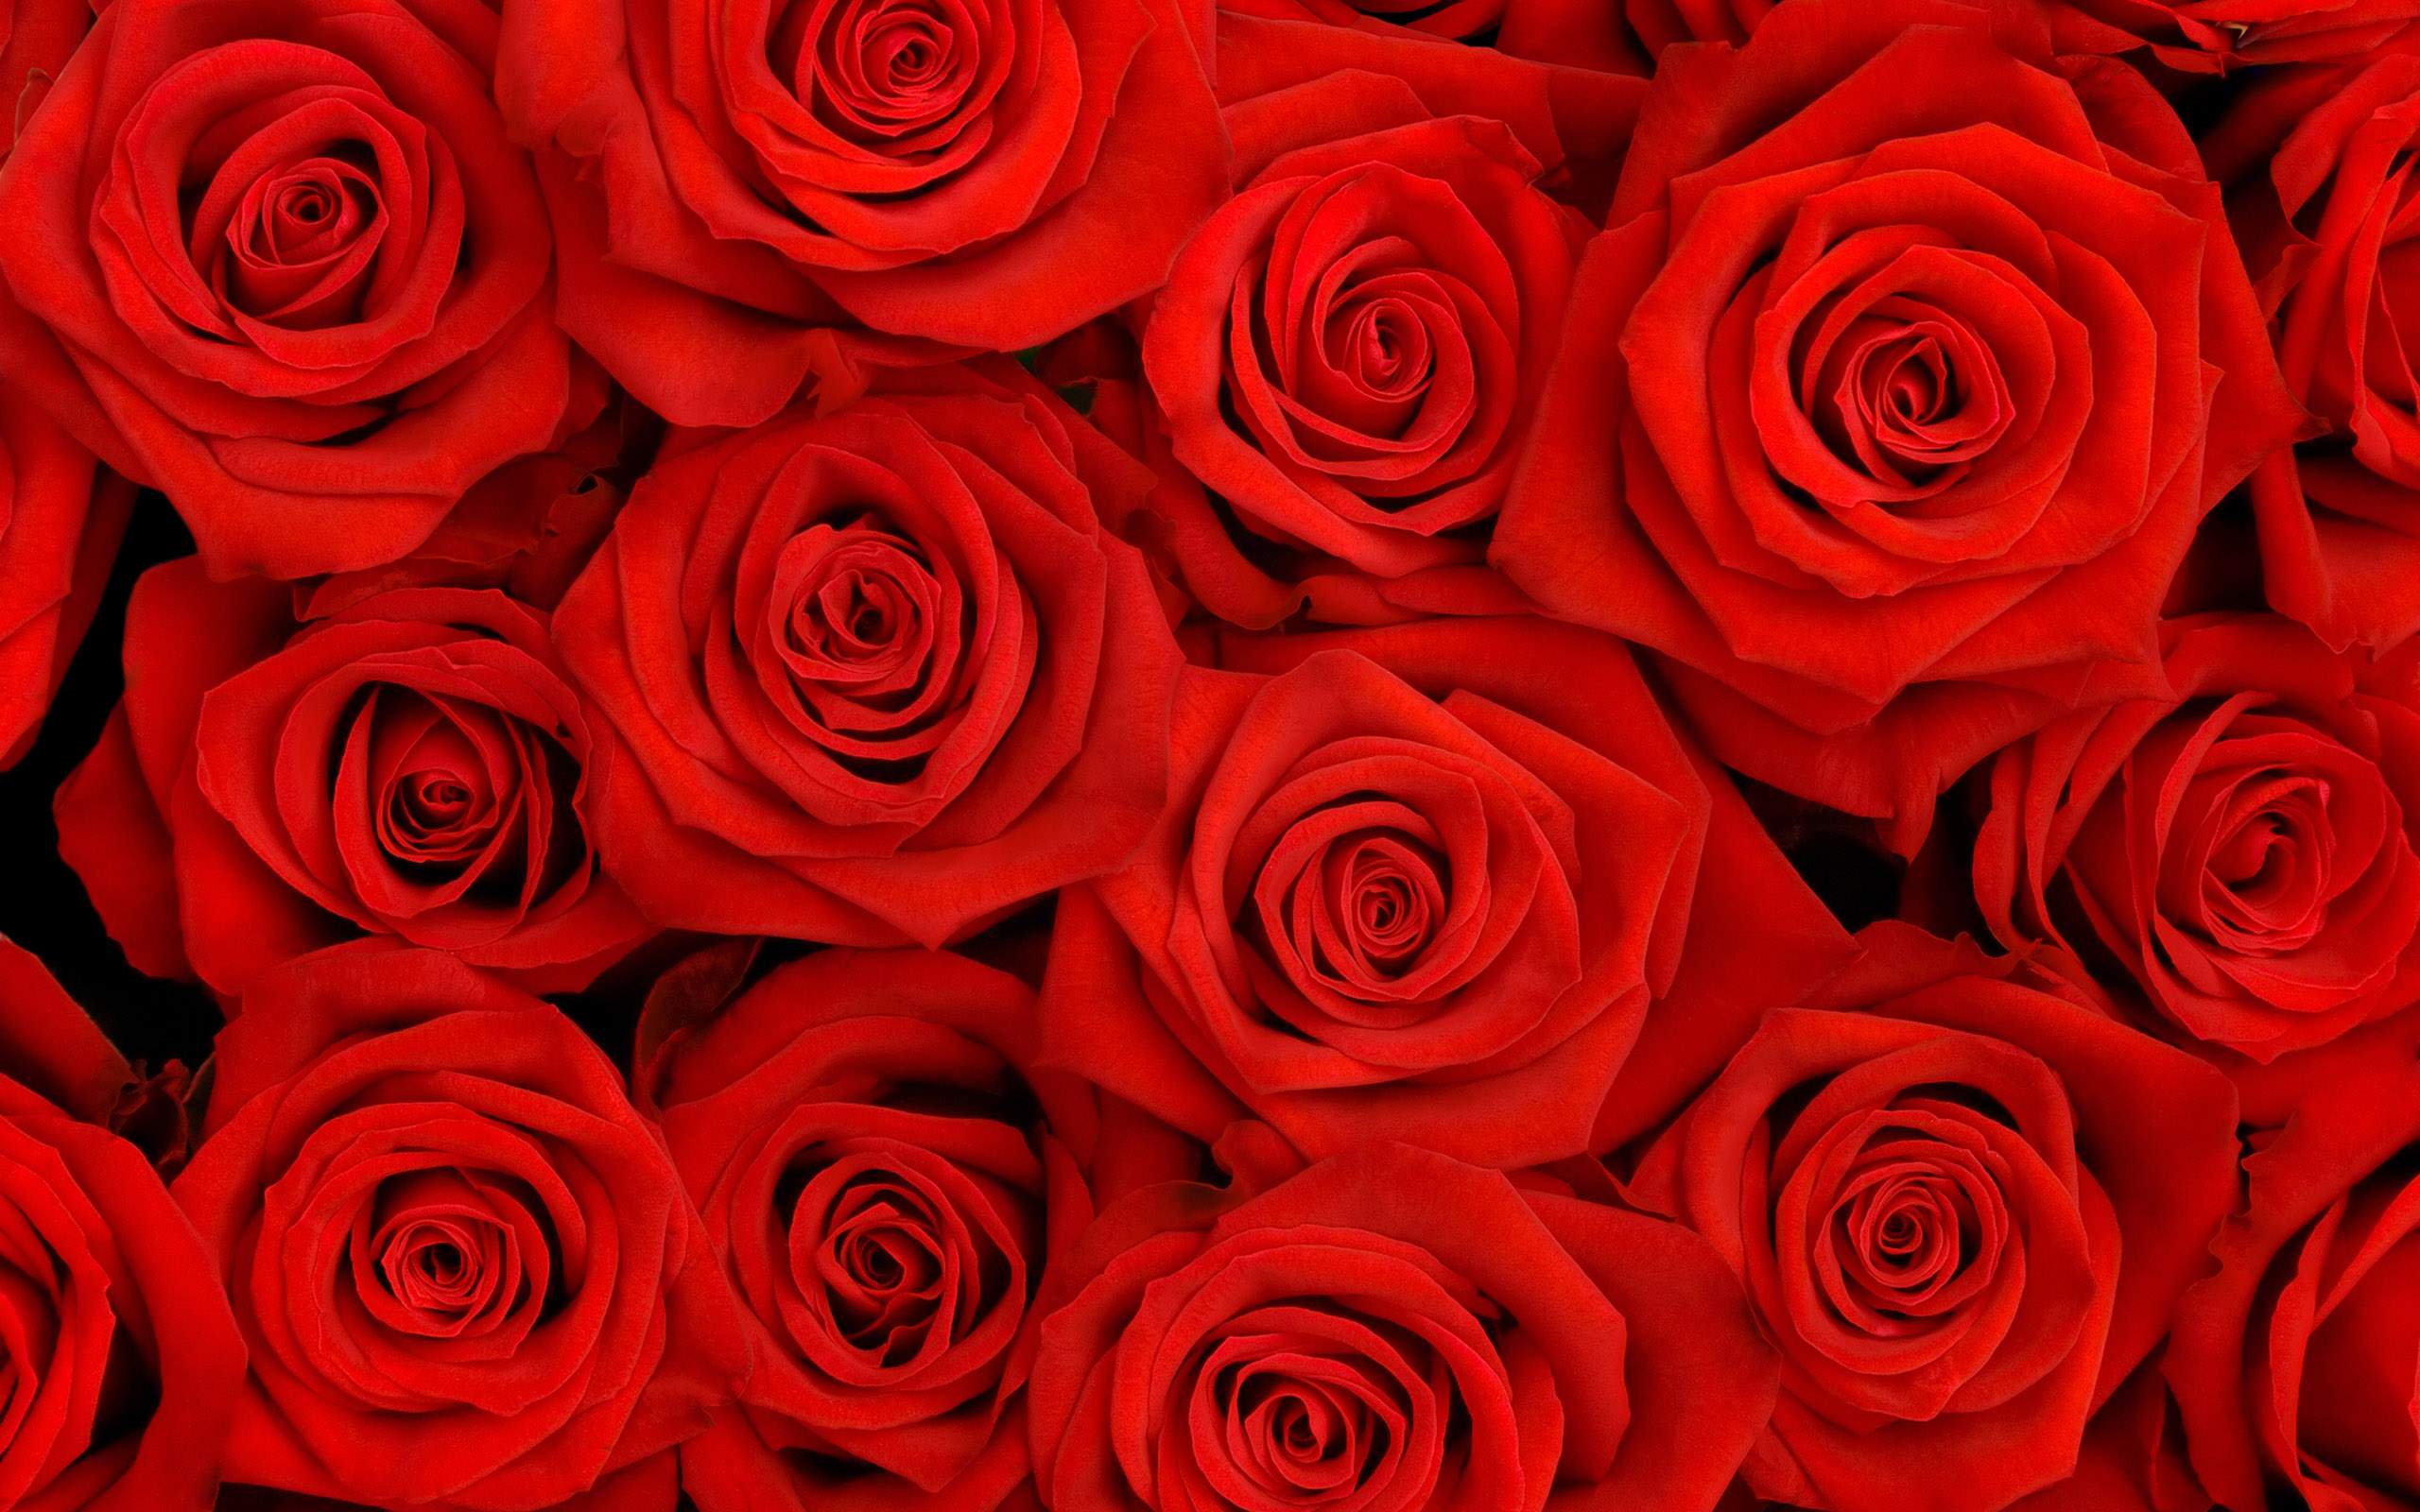 stunning hd red roses image